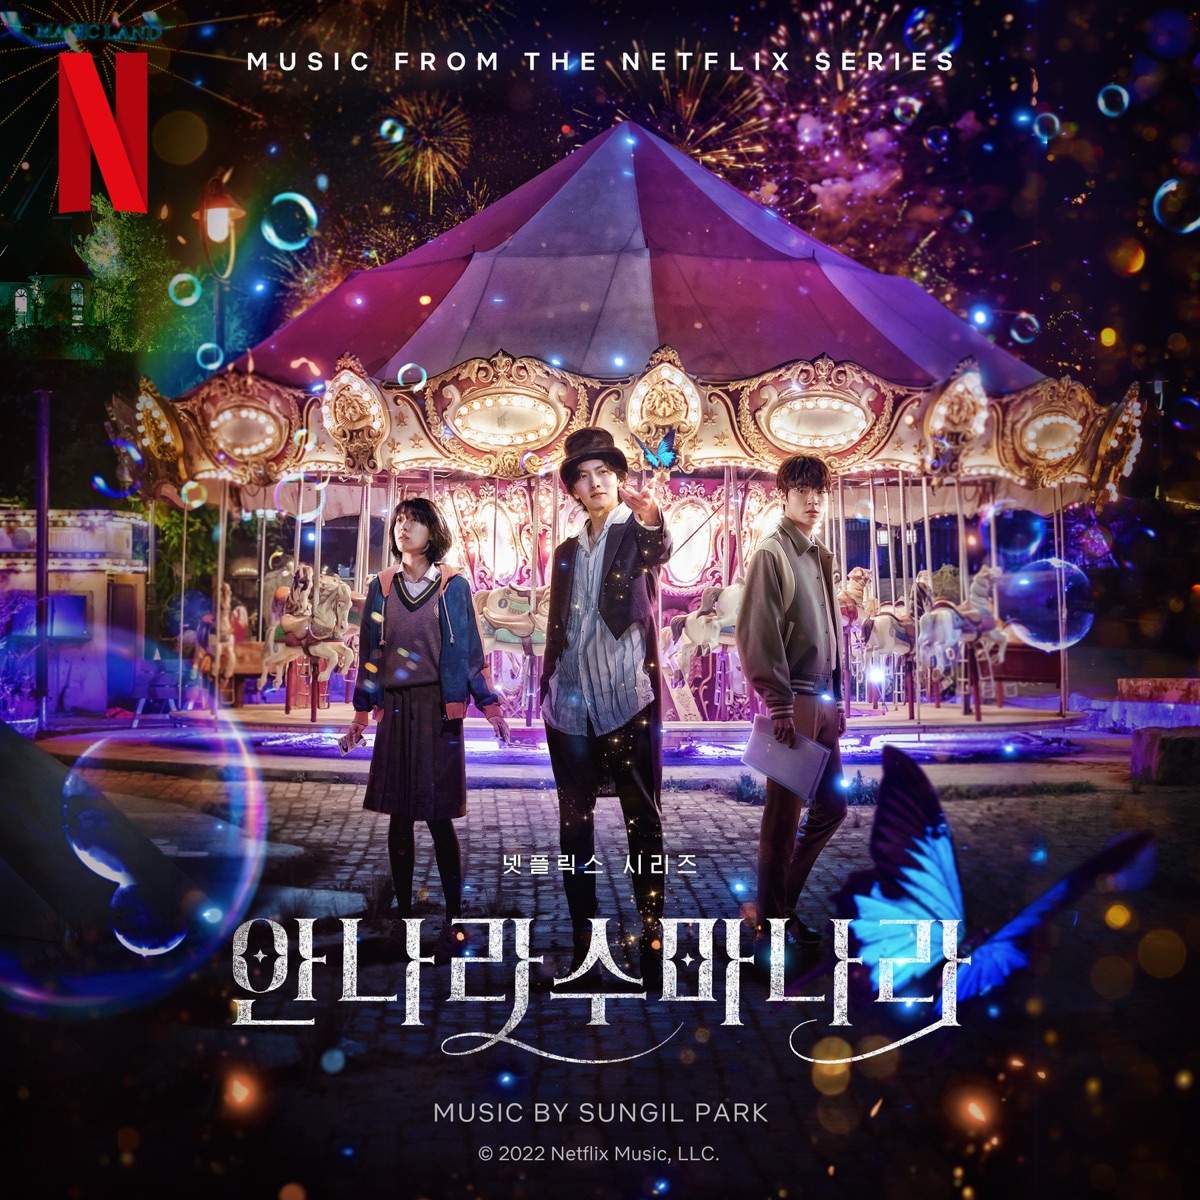 Various Artists – The Sound of Magic (Soundtrack from the Netflix Series)